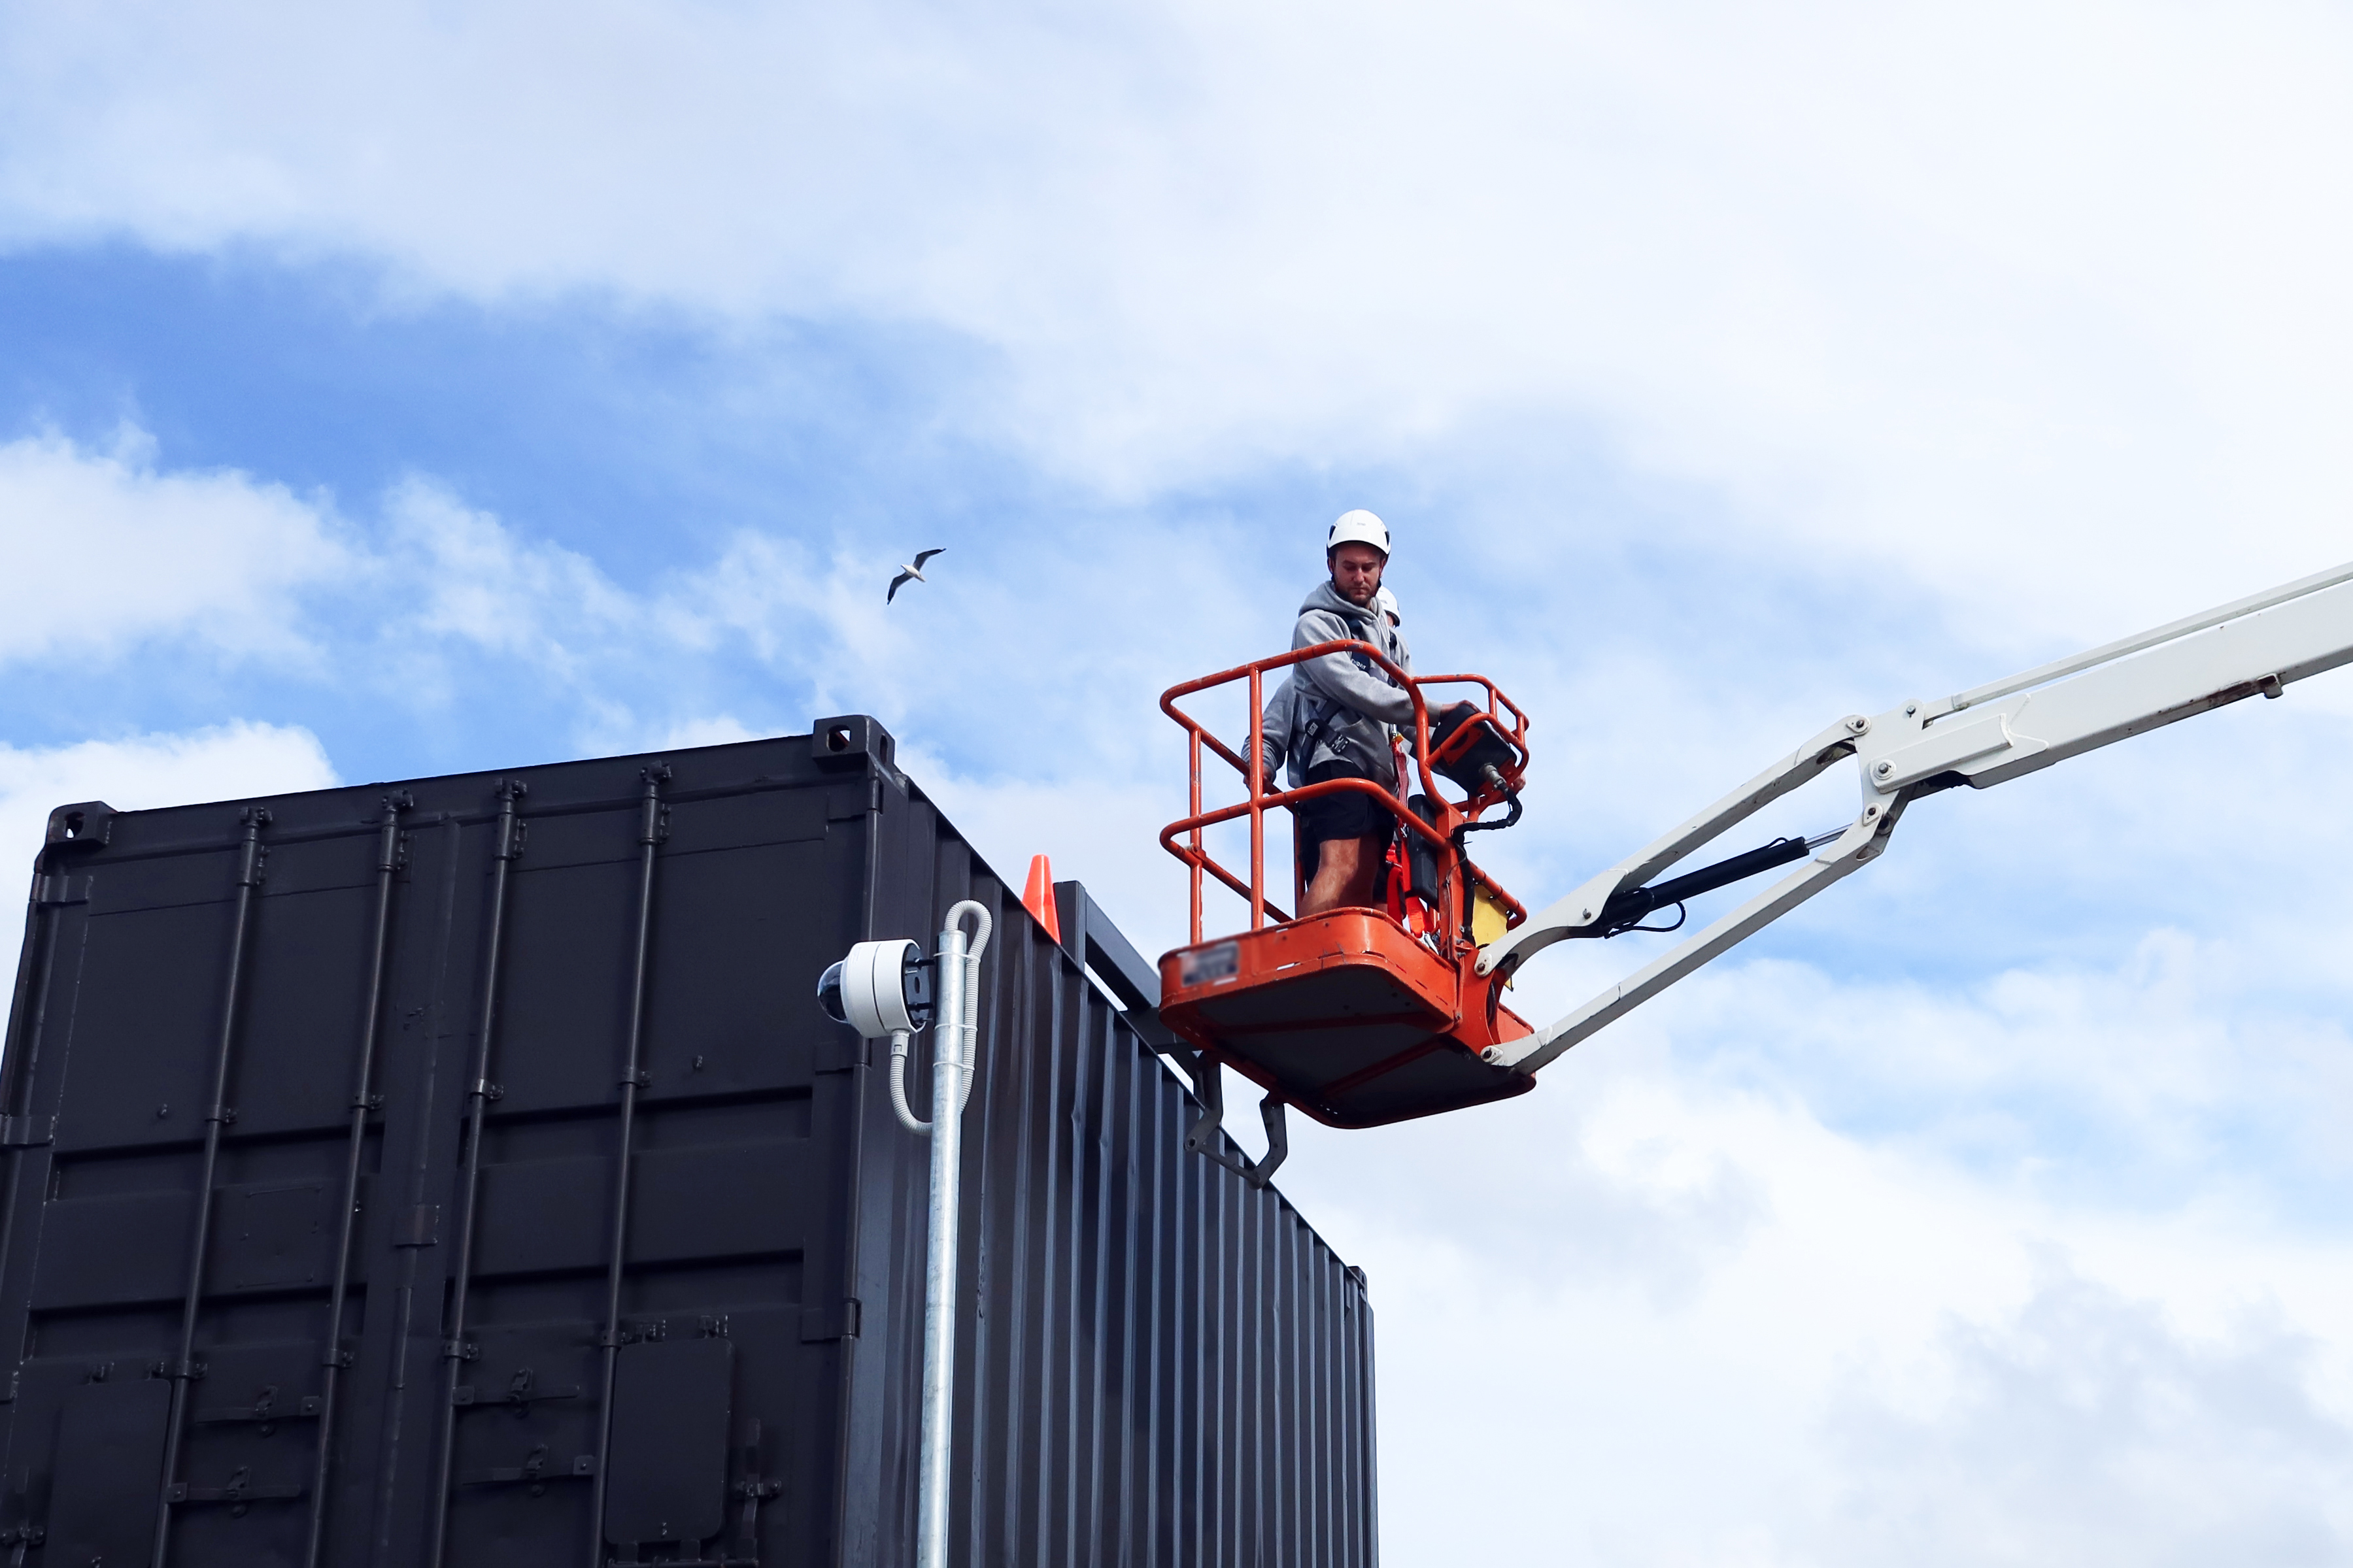 Two workers using an elevated work platform in the air above a shipping container